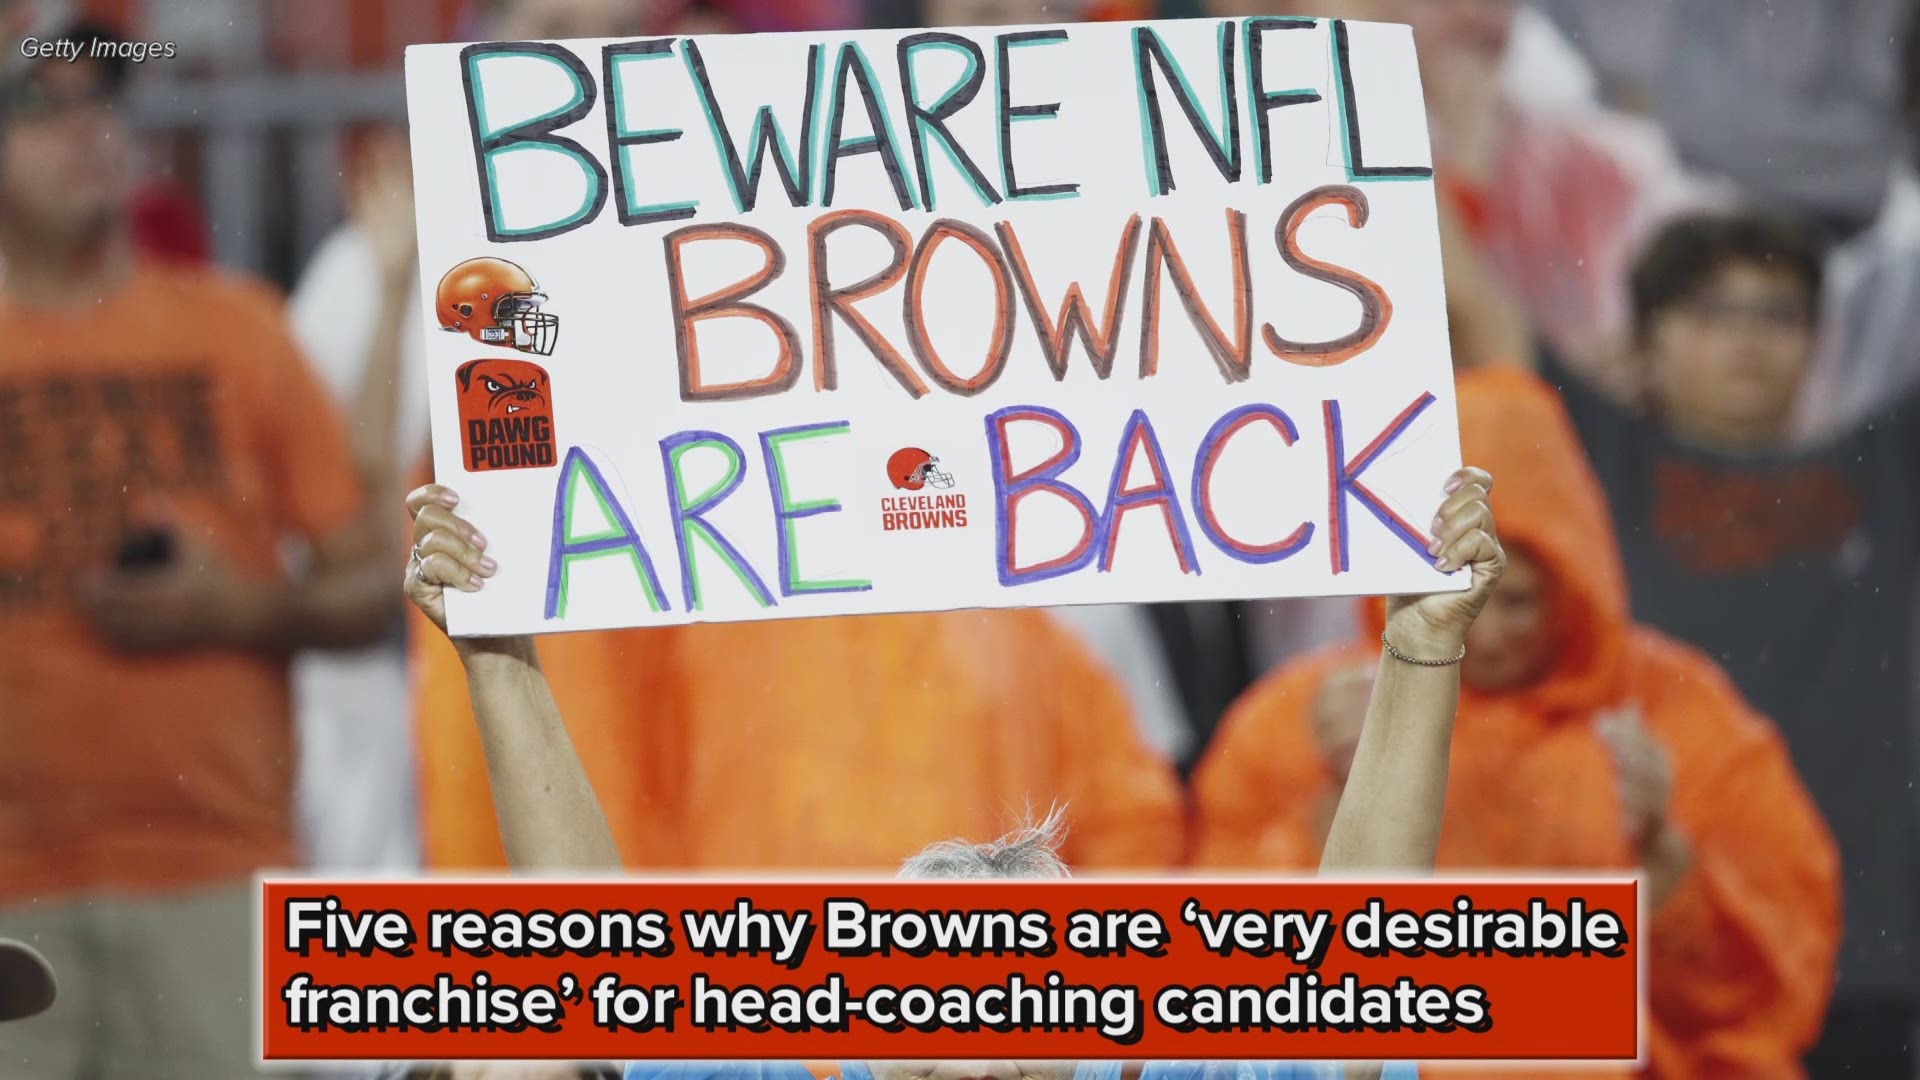 Here are five reasons why the Cleveland Browns are a ‘very desirable franchise’ for head-coaching candidates.